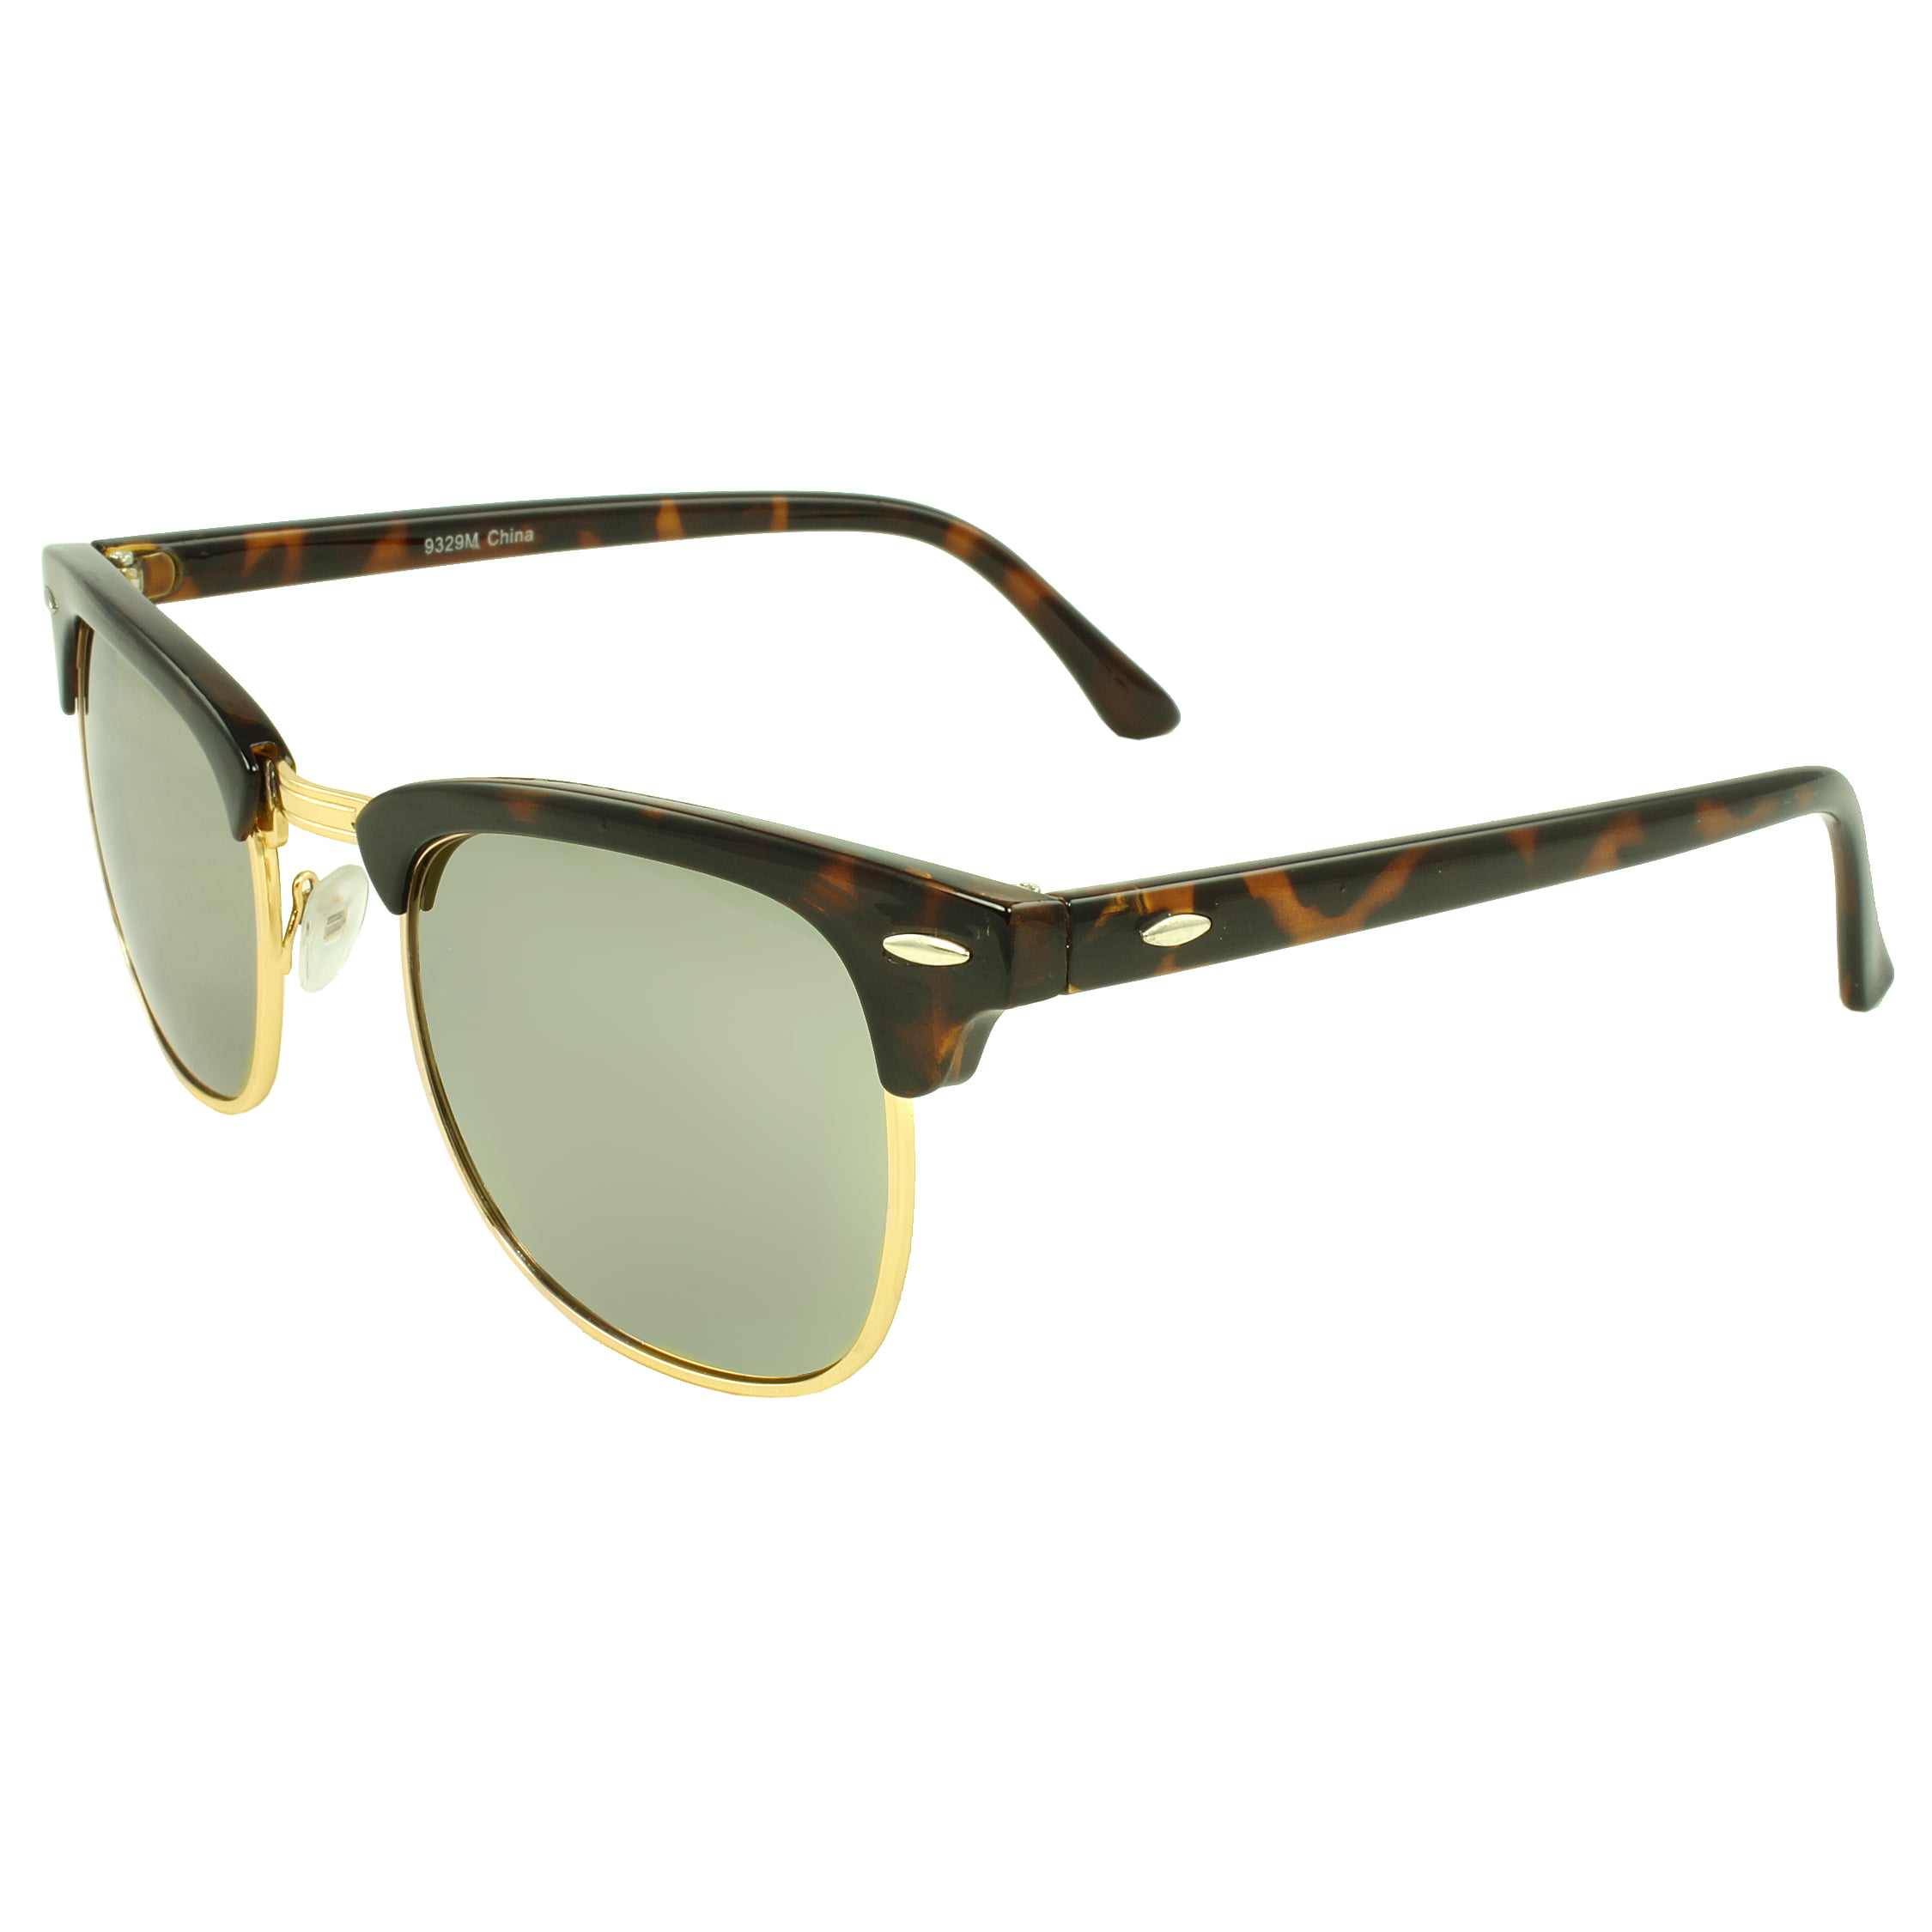 7008 "JOHN LENNON SUNGLASSES " CLASSIC ROUND GLASSES IN A NEW RAY OF COLORS 